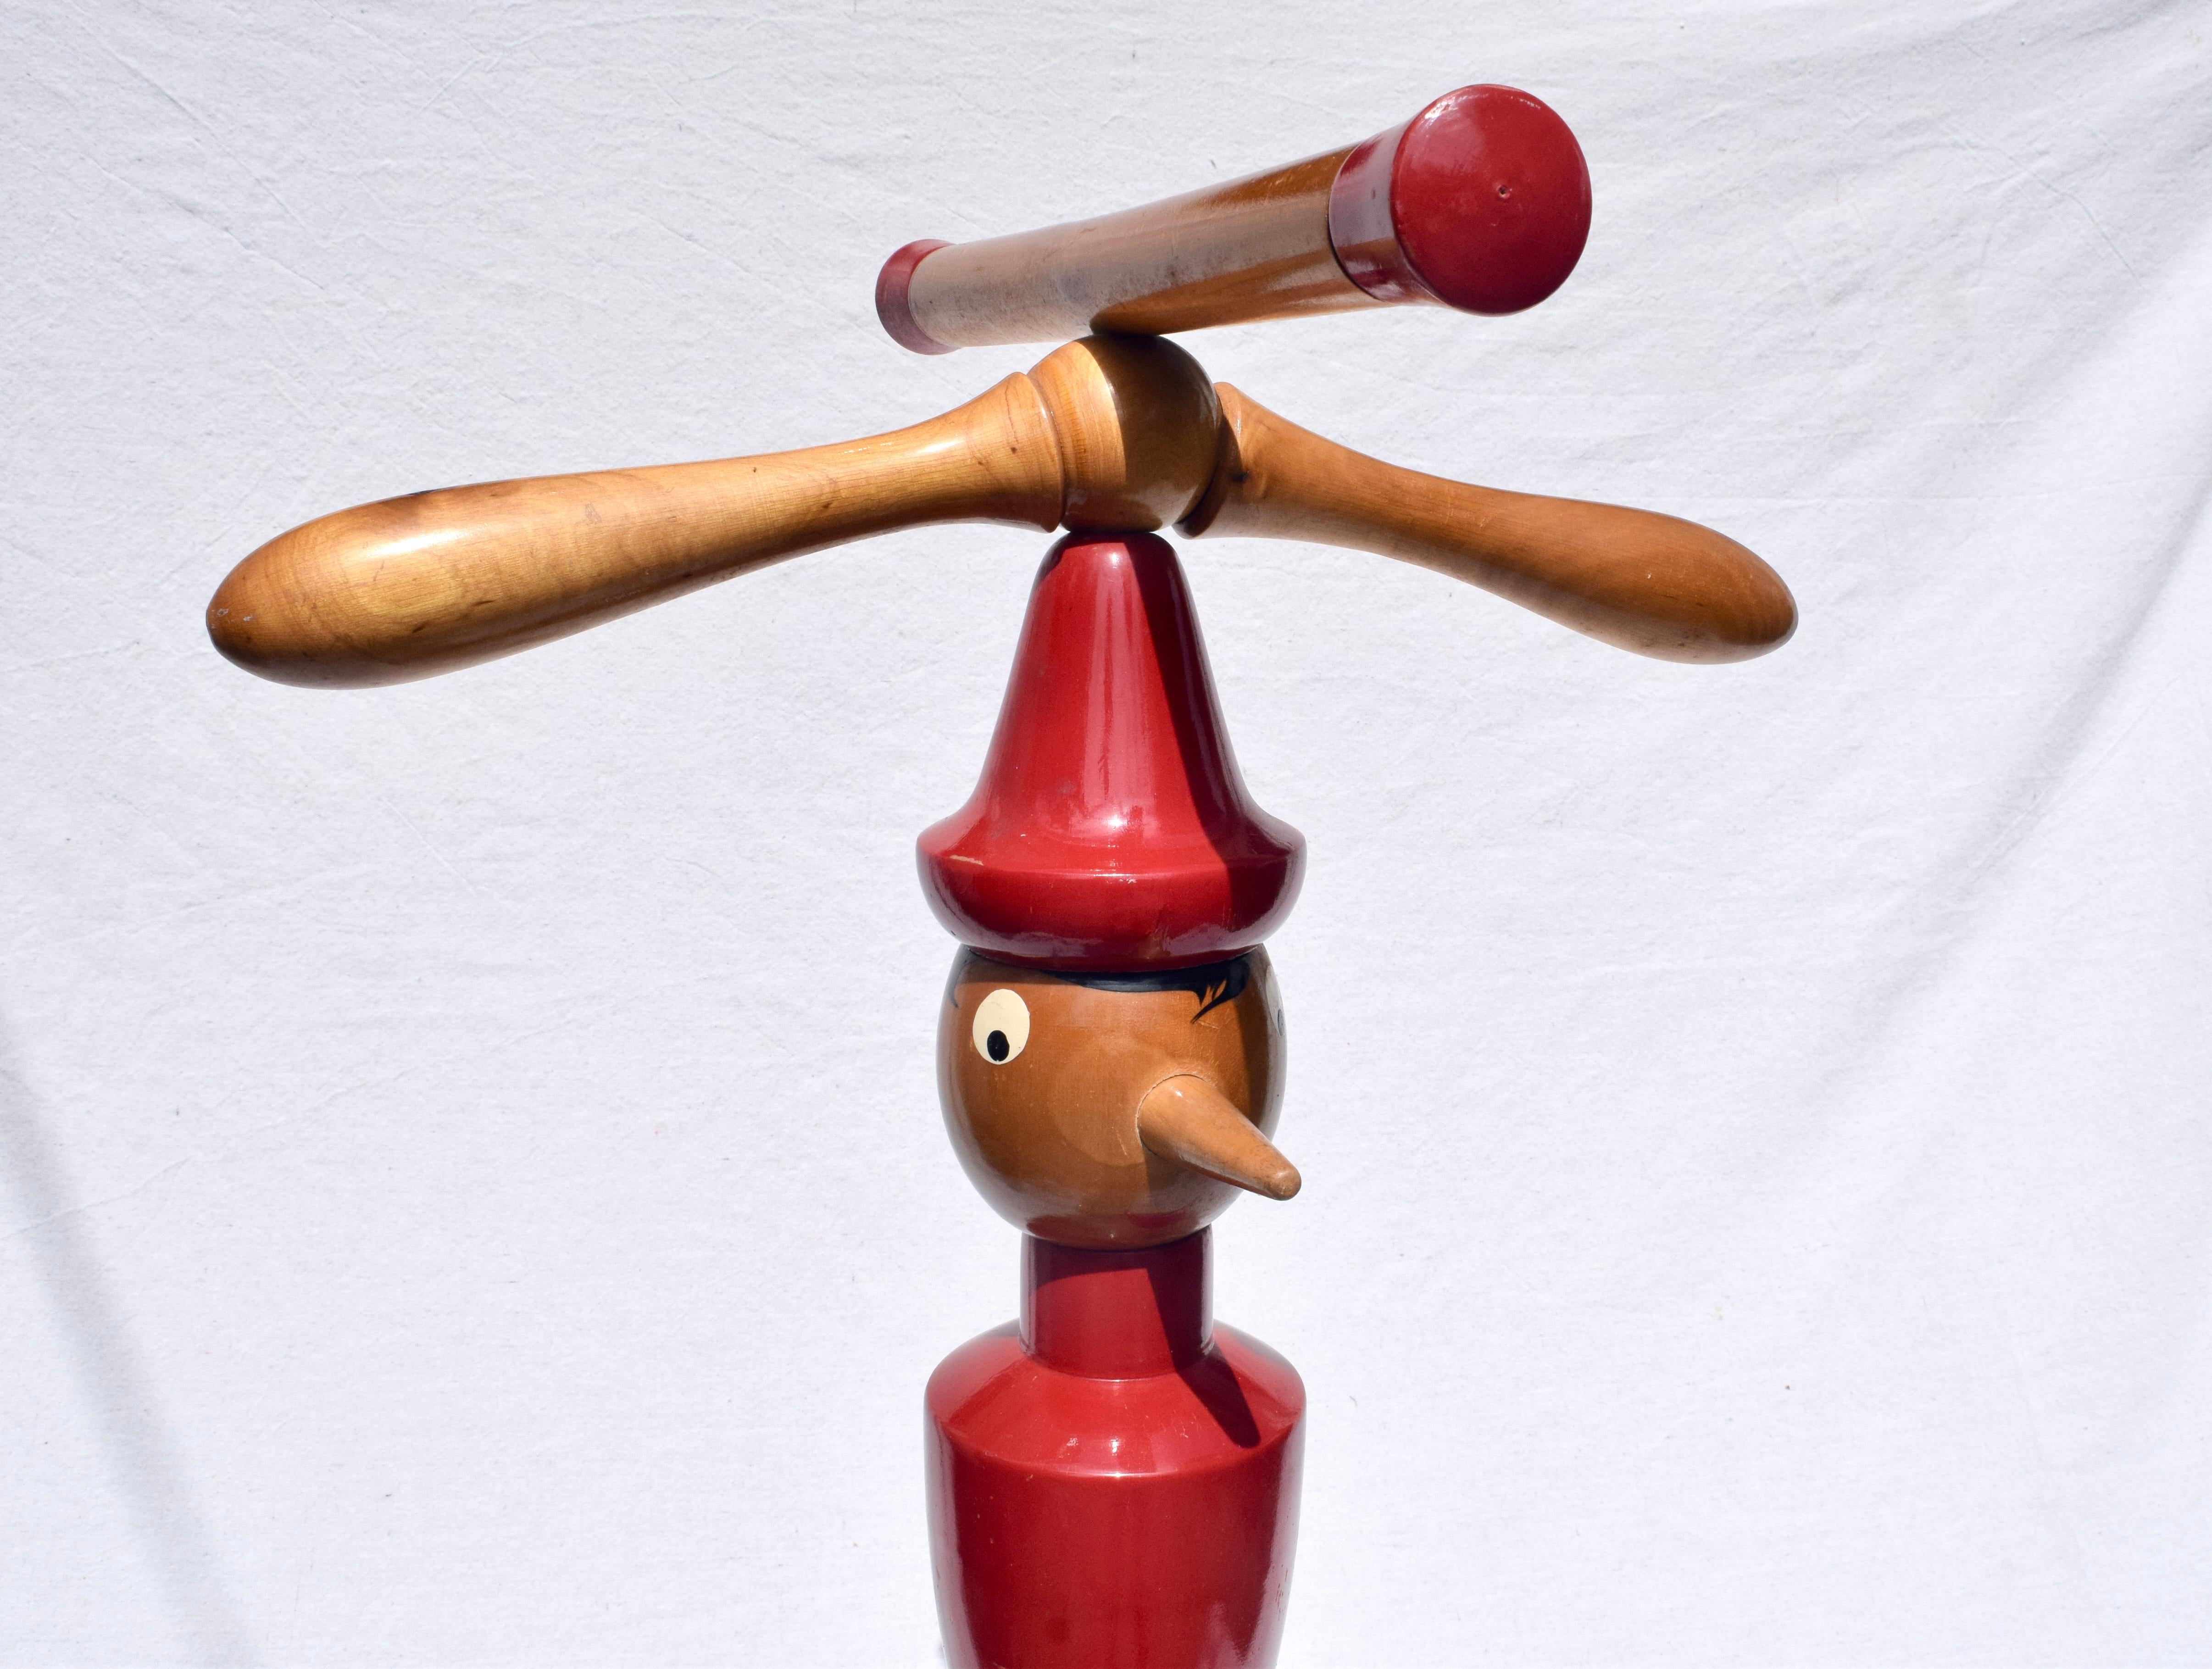 Valet Stands Pinocchio & Jiminy Cricket, 1940s Italian Design For Sale 5